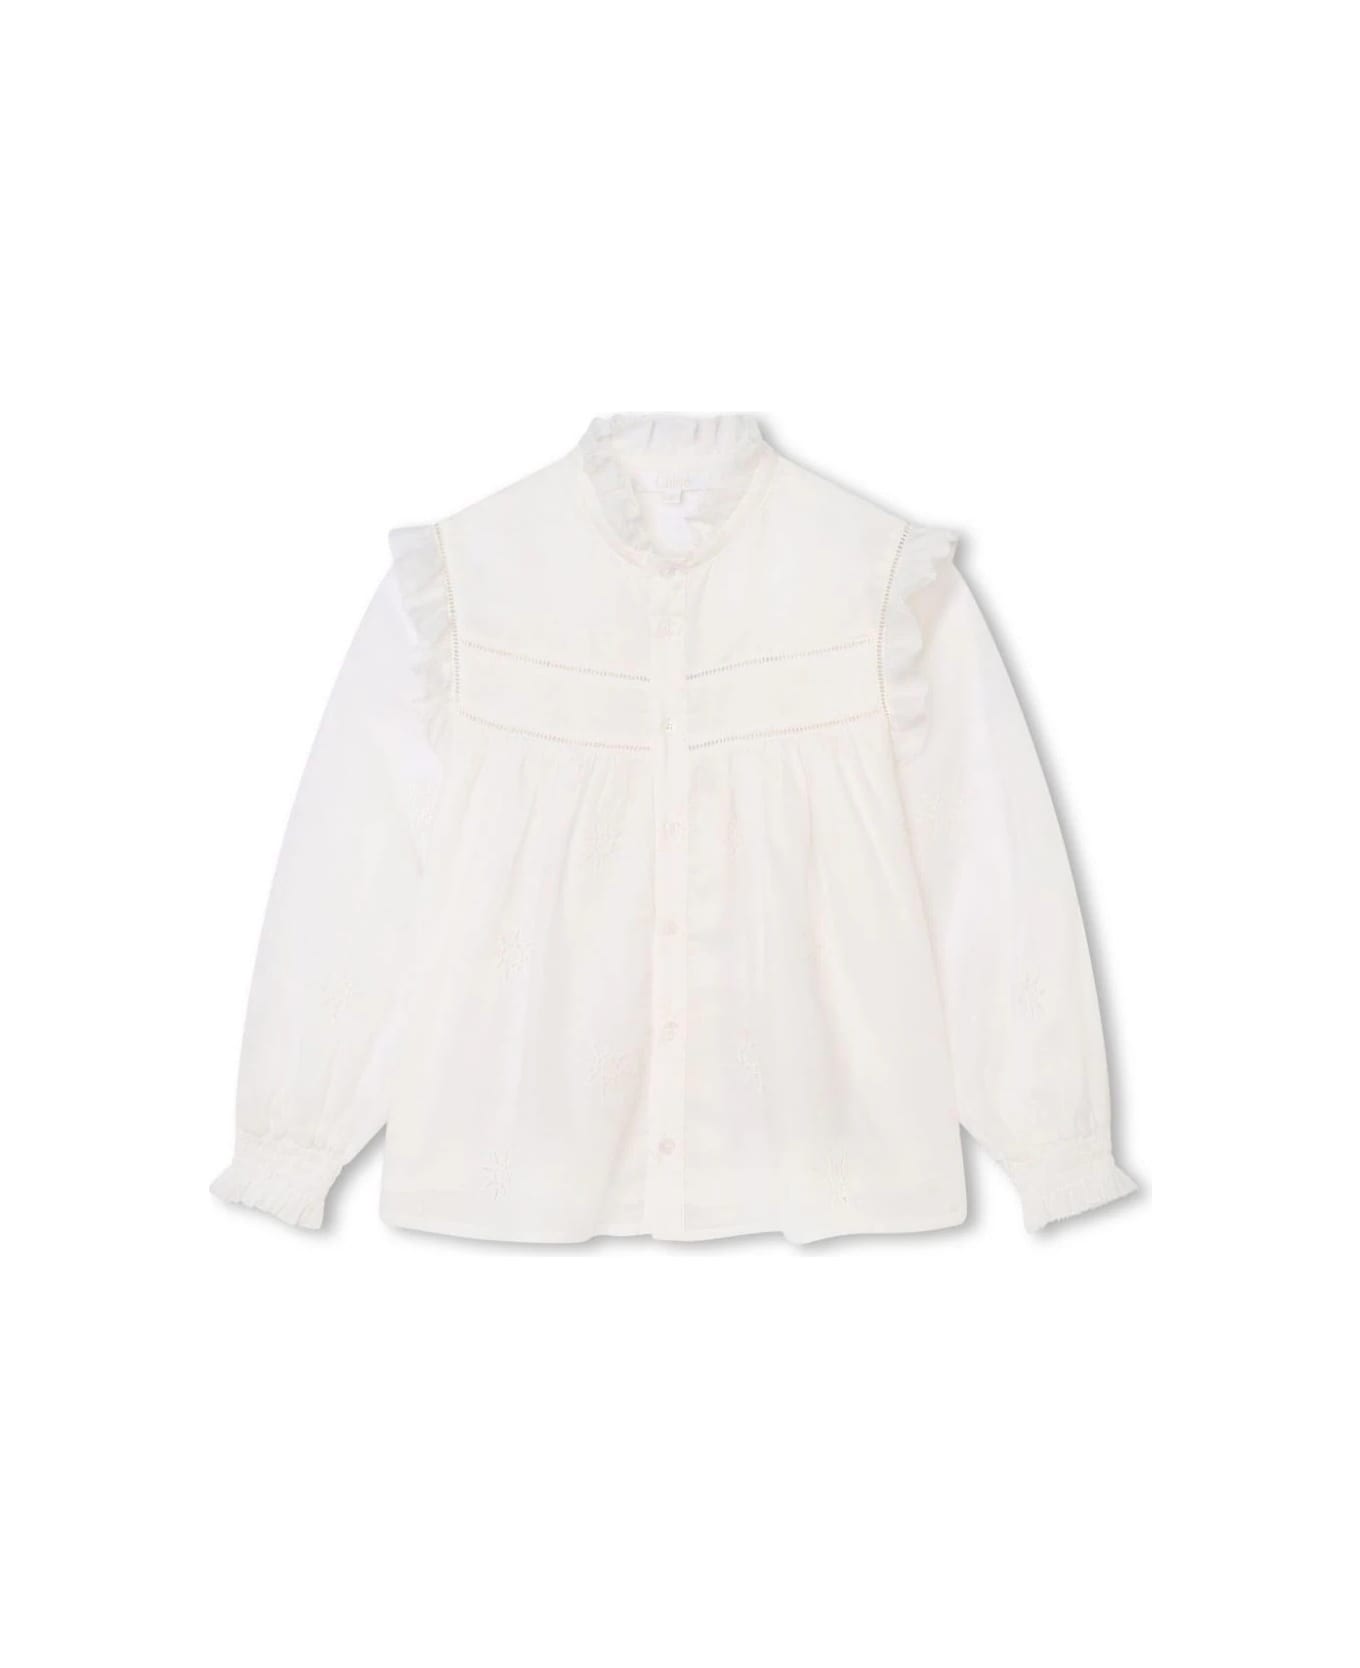 Chloé White Shirt With All-over Star Embroidery - White